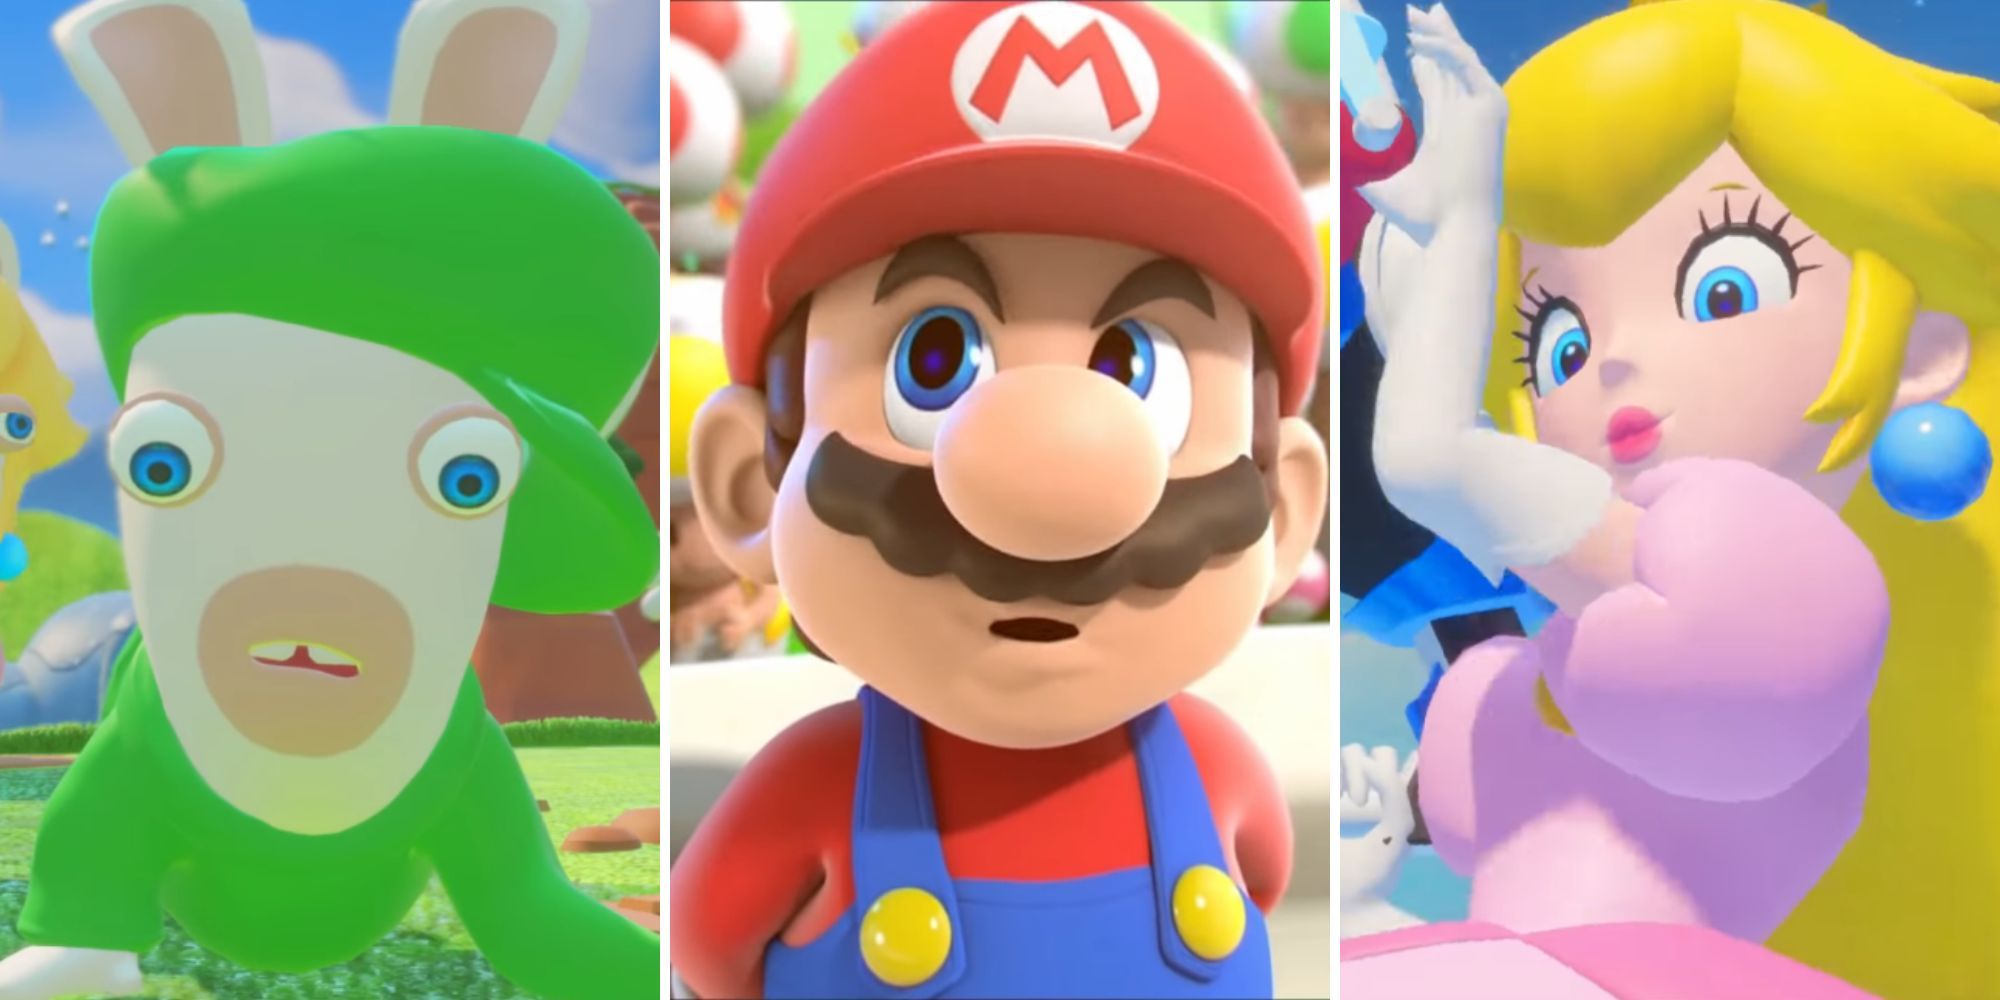 Rabbid Luigi looks up, Mario stands in front of a crowd, Peach flies through the sky